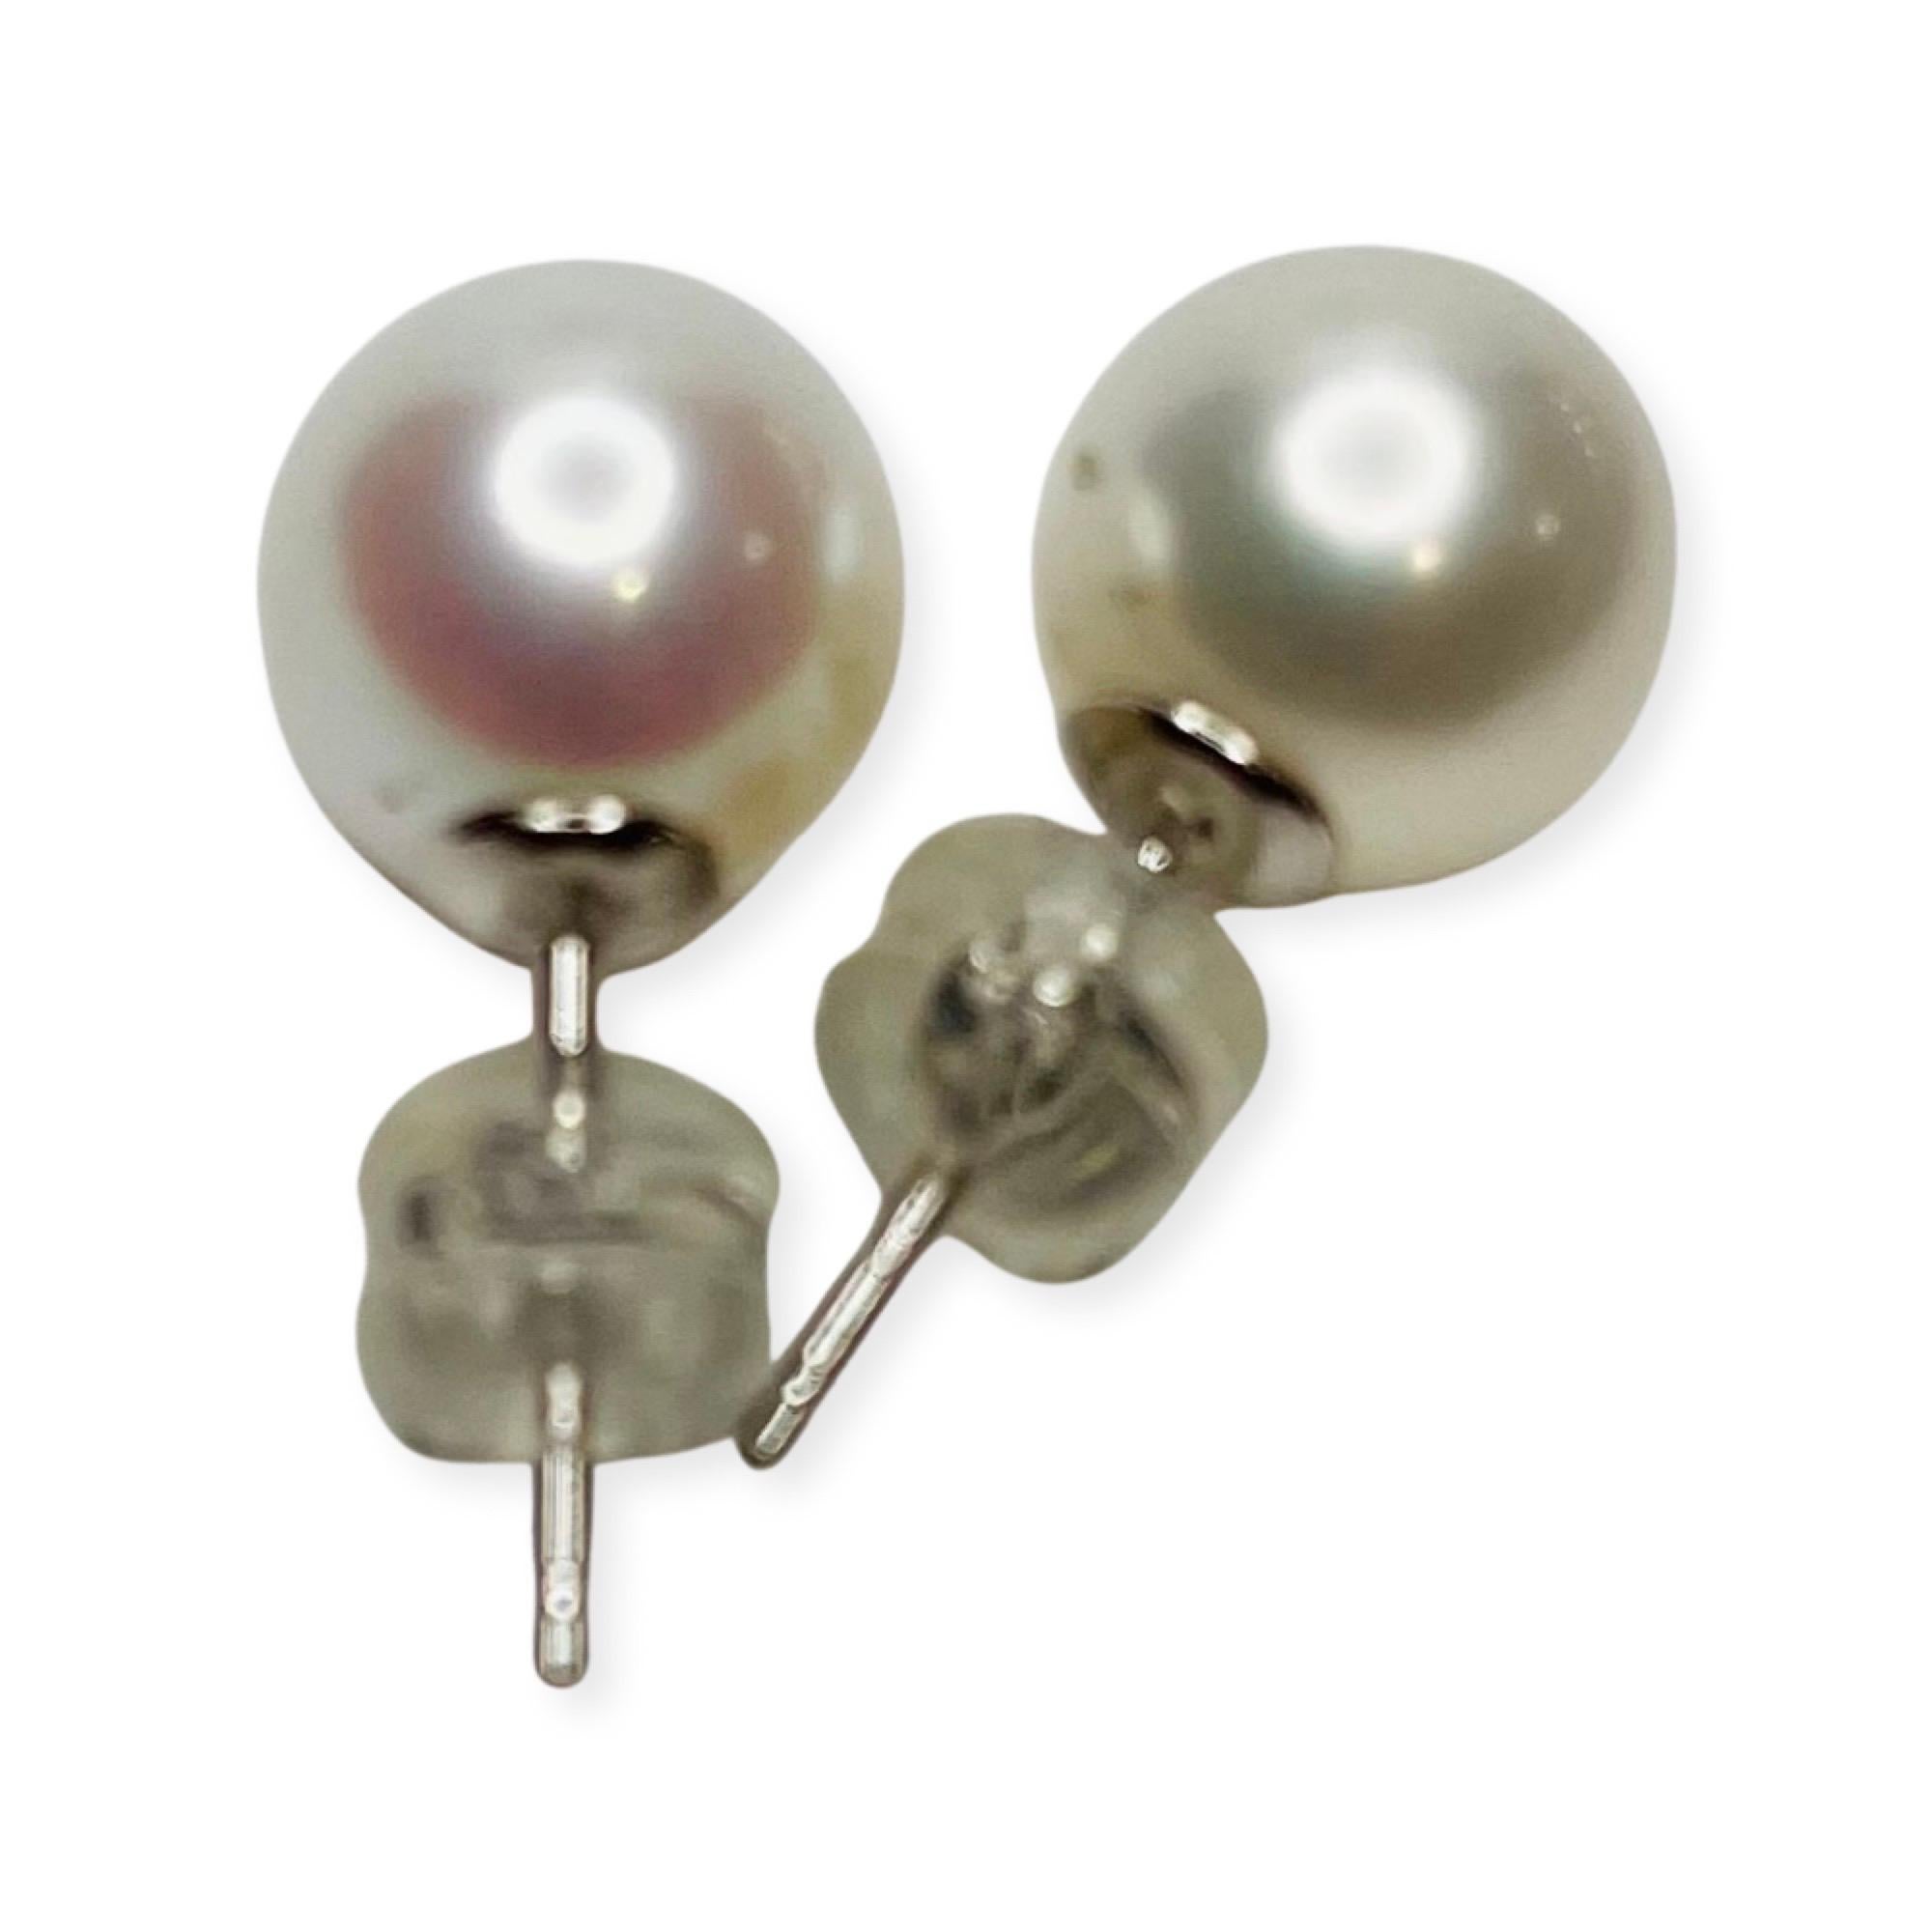 Lithos 18K White Gold Cultured Freshwater Pearl Earrings. The Pearls are 8.0-8.5 mm. They are round, with very slight blemished and high luster. These are stud earrings. They have 14KW gold backs embedded in silicone. 400-30-762